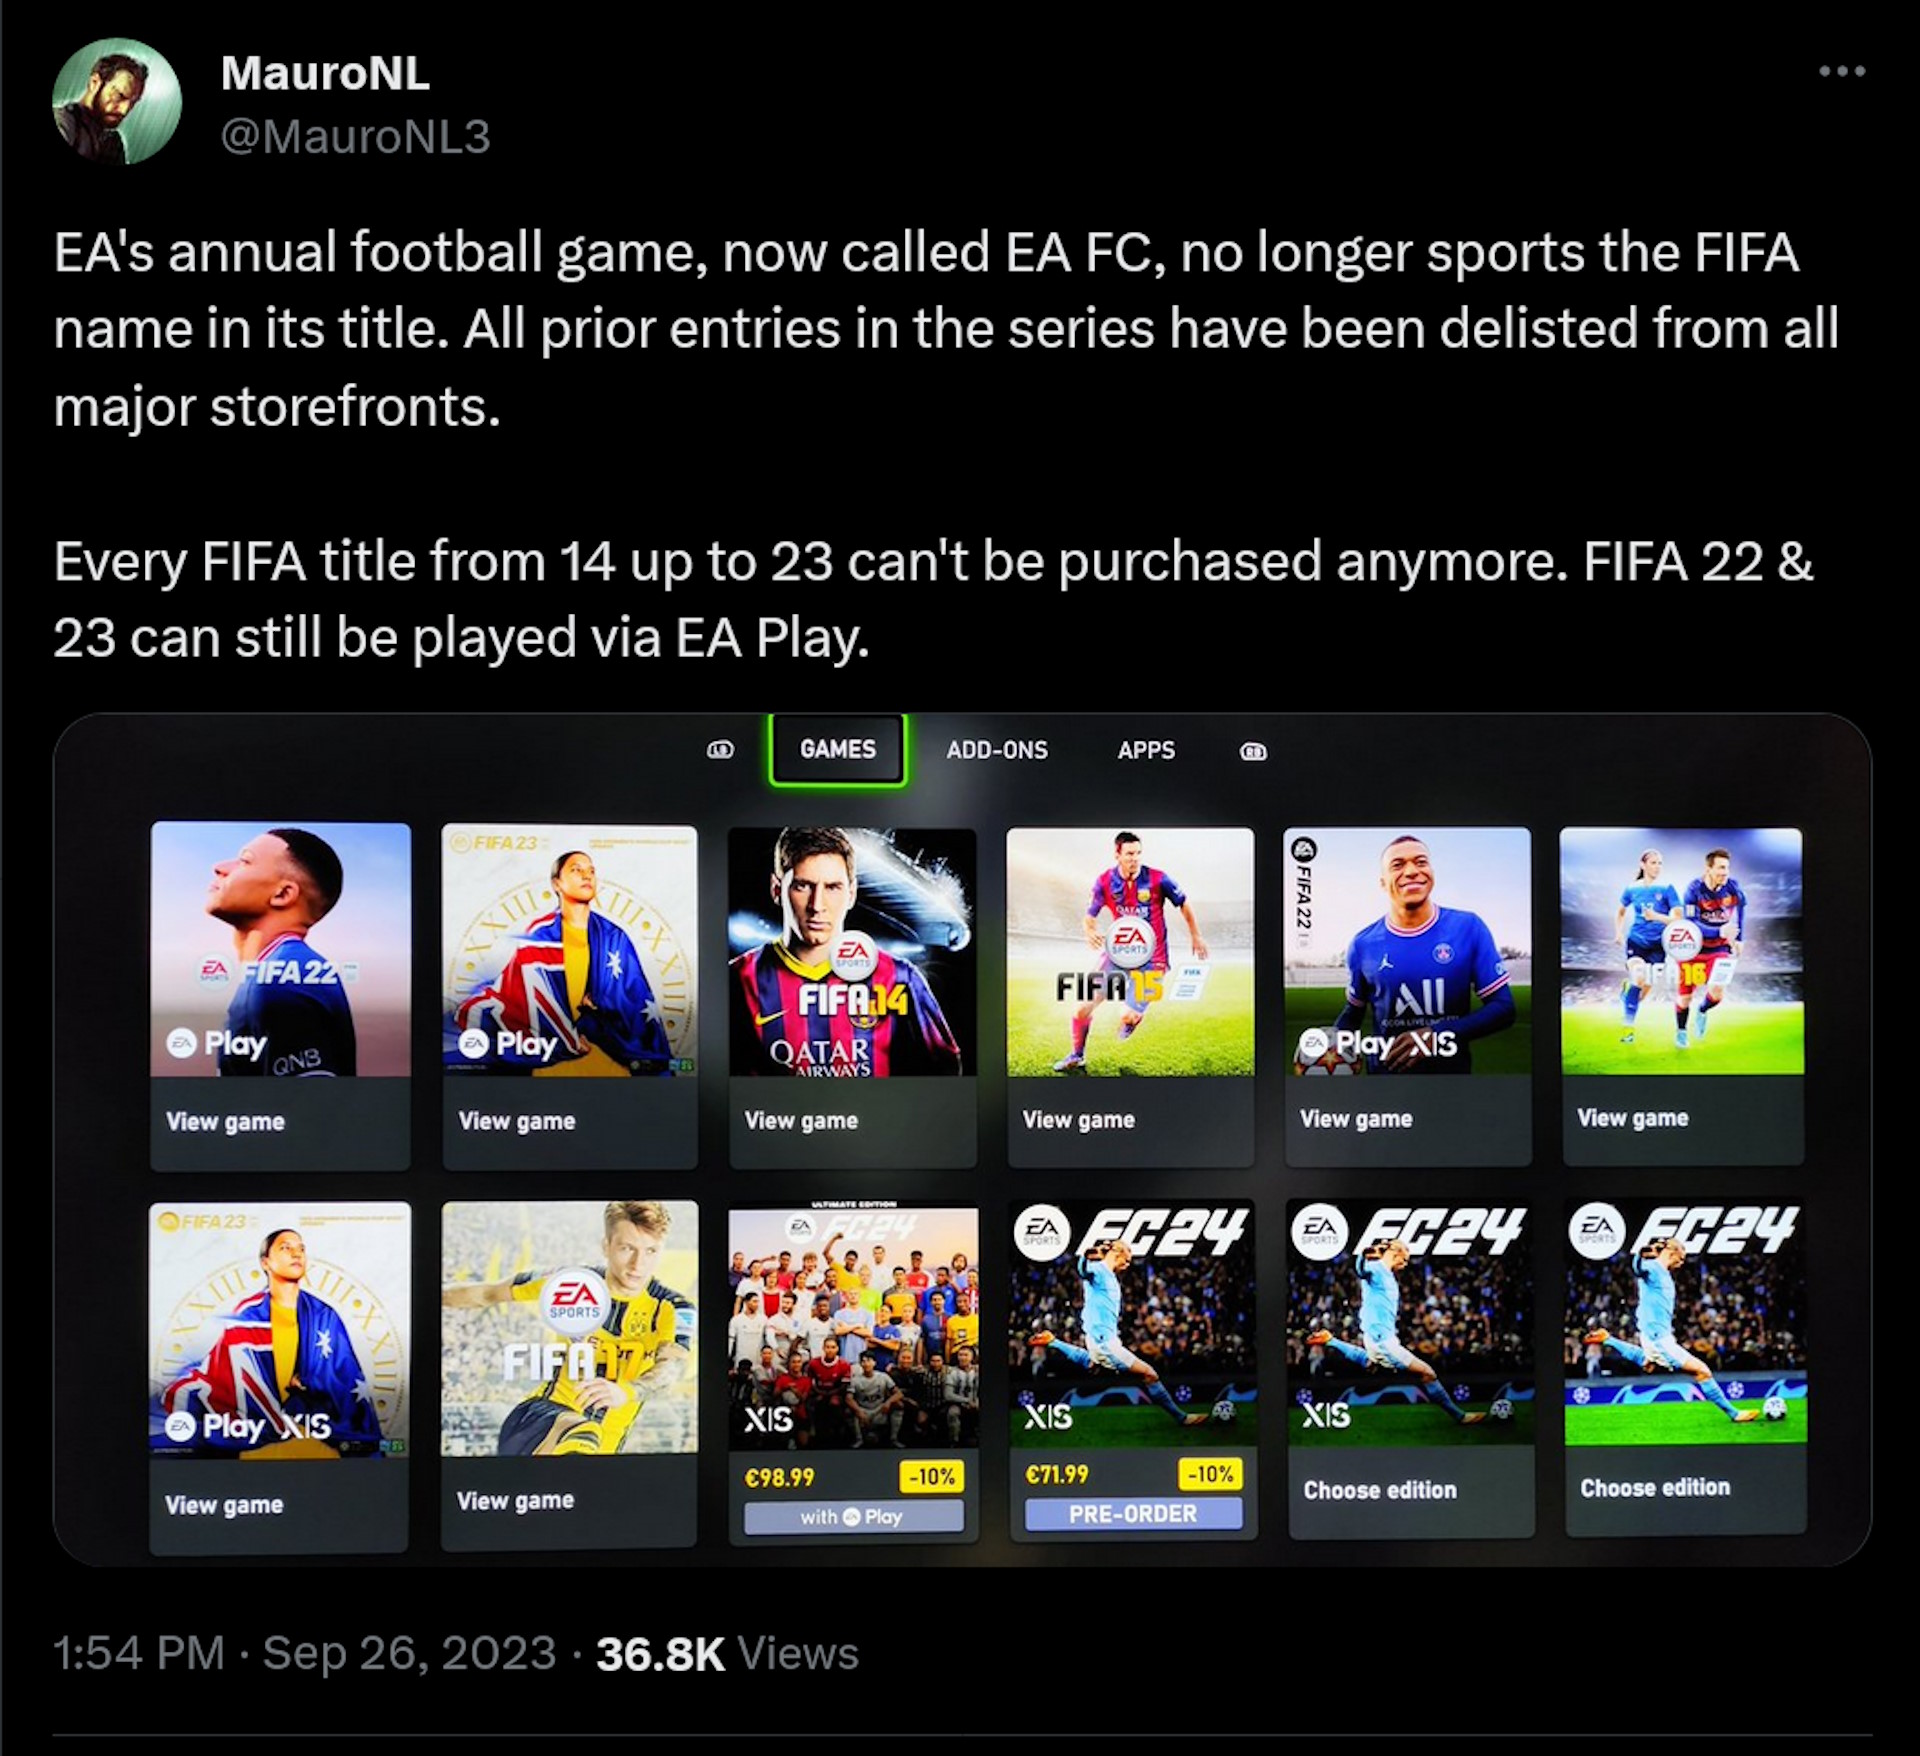 EA's annual football game, now called EA FC, no longer sports the FIFA name in its title. All prior entries in the series have been delisted from all major storefronts.  Every FIFA title from 14 up to 23 can't be purchased anymore. FIFA 22 & 23 can still be played via EA Play.